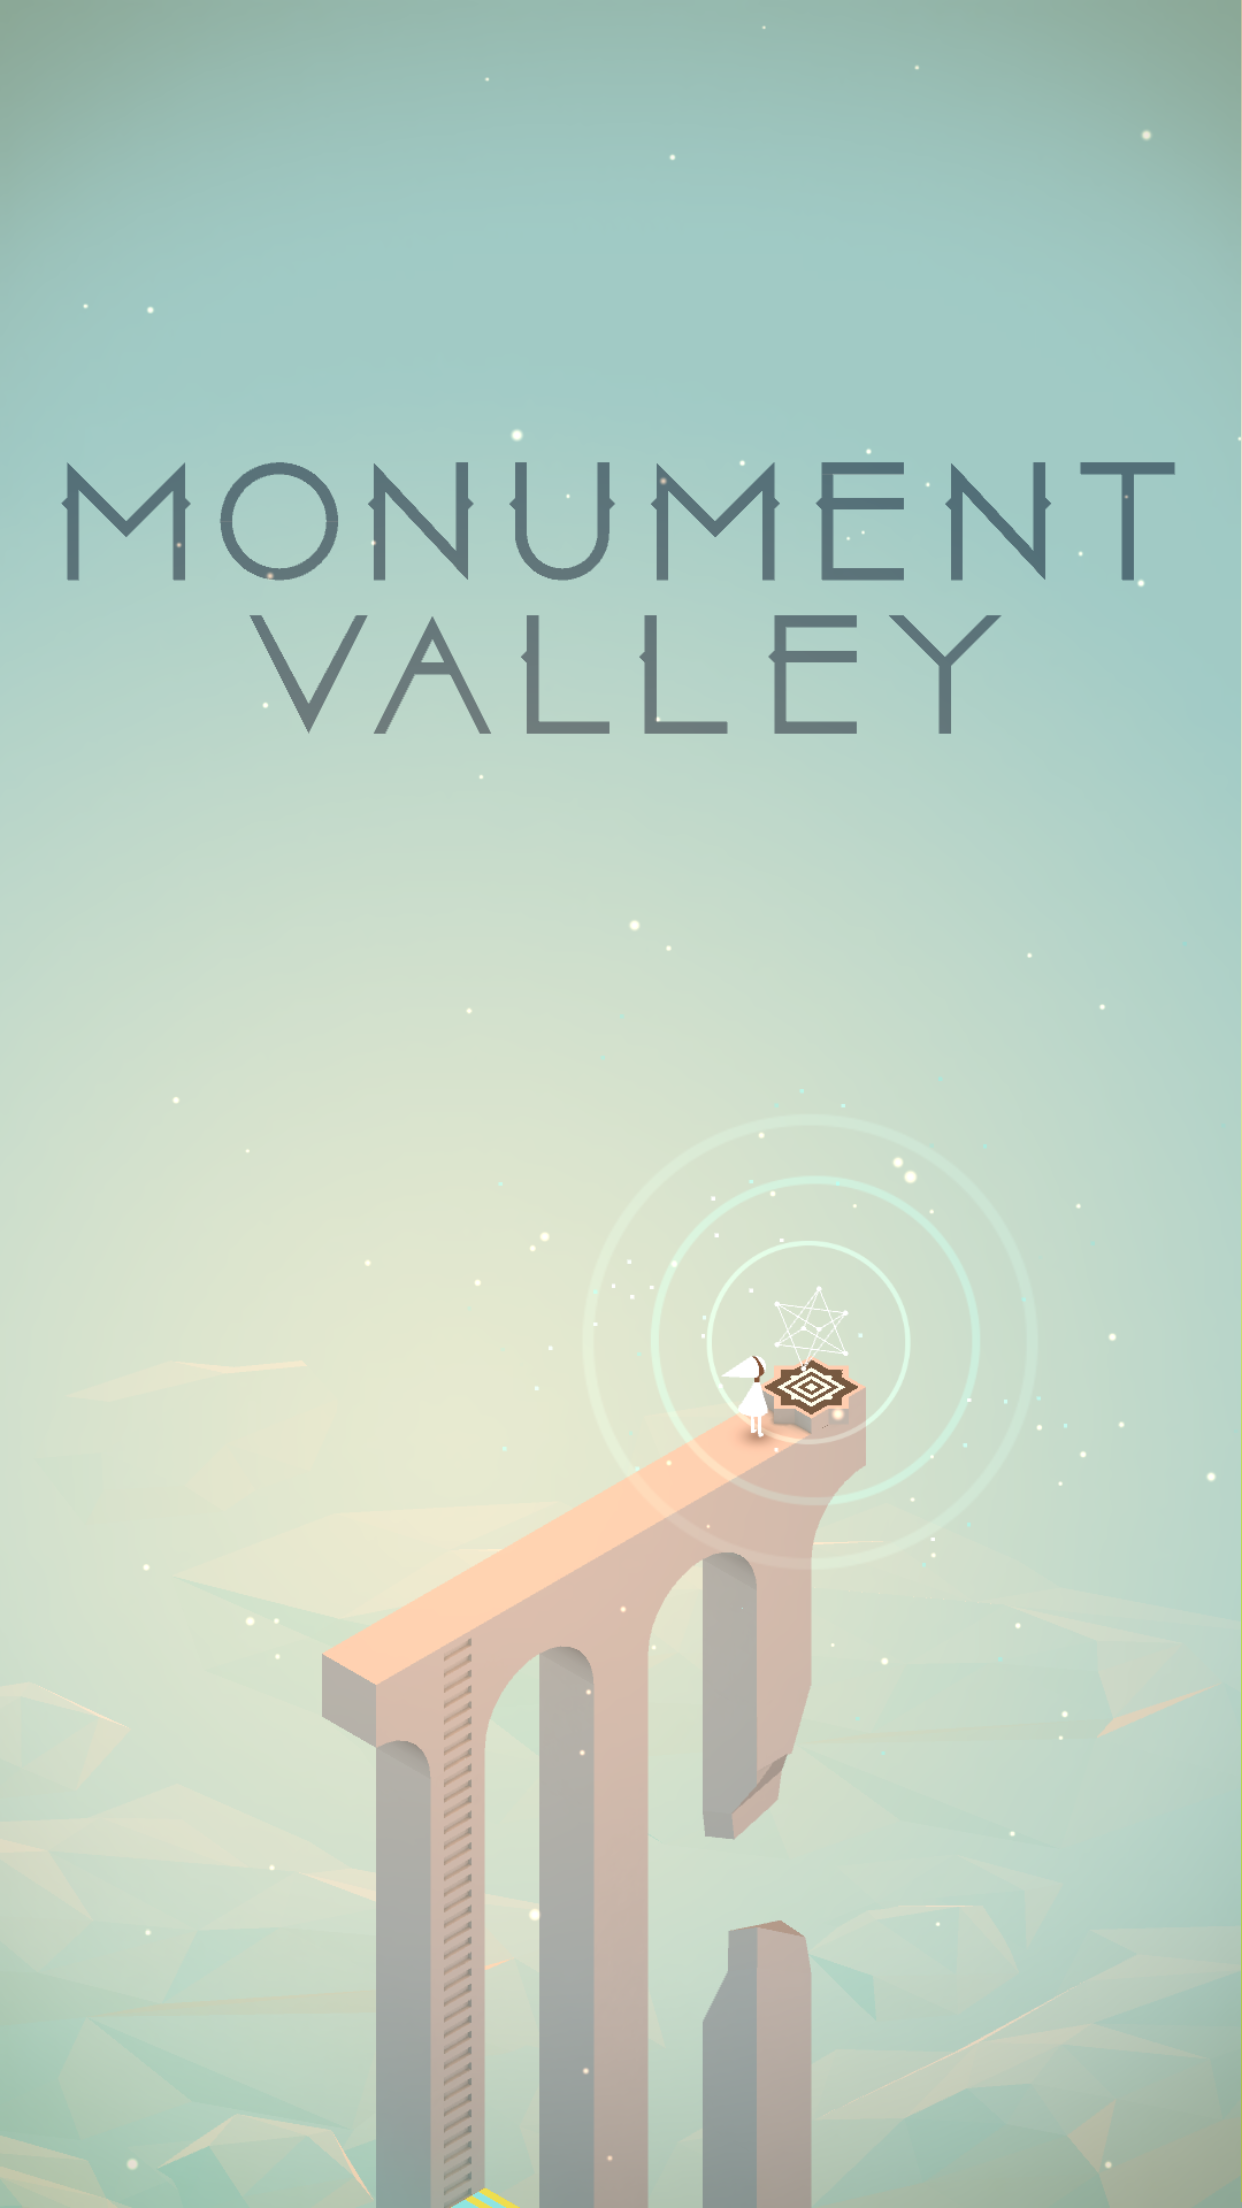 Apple Design Awards 14を受賞したパズルゲームアプリ Monument Valley に待望の新ステージが追加 Time To Live Forever